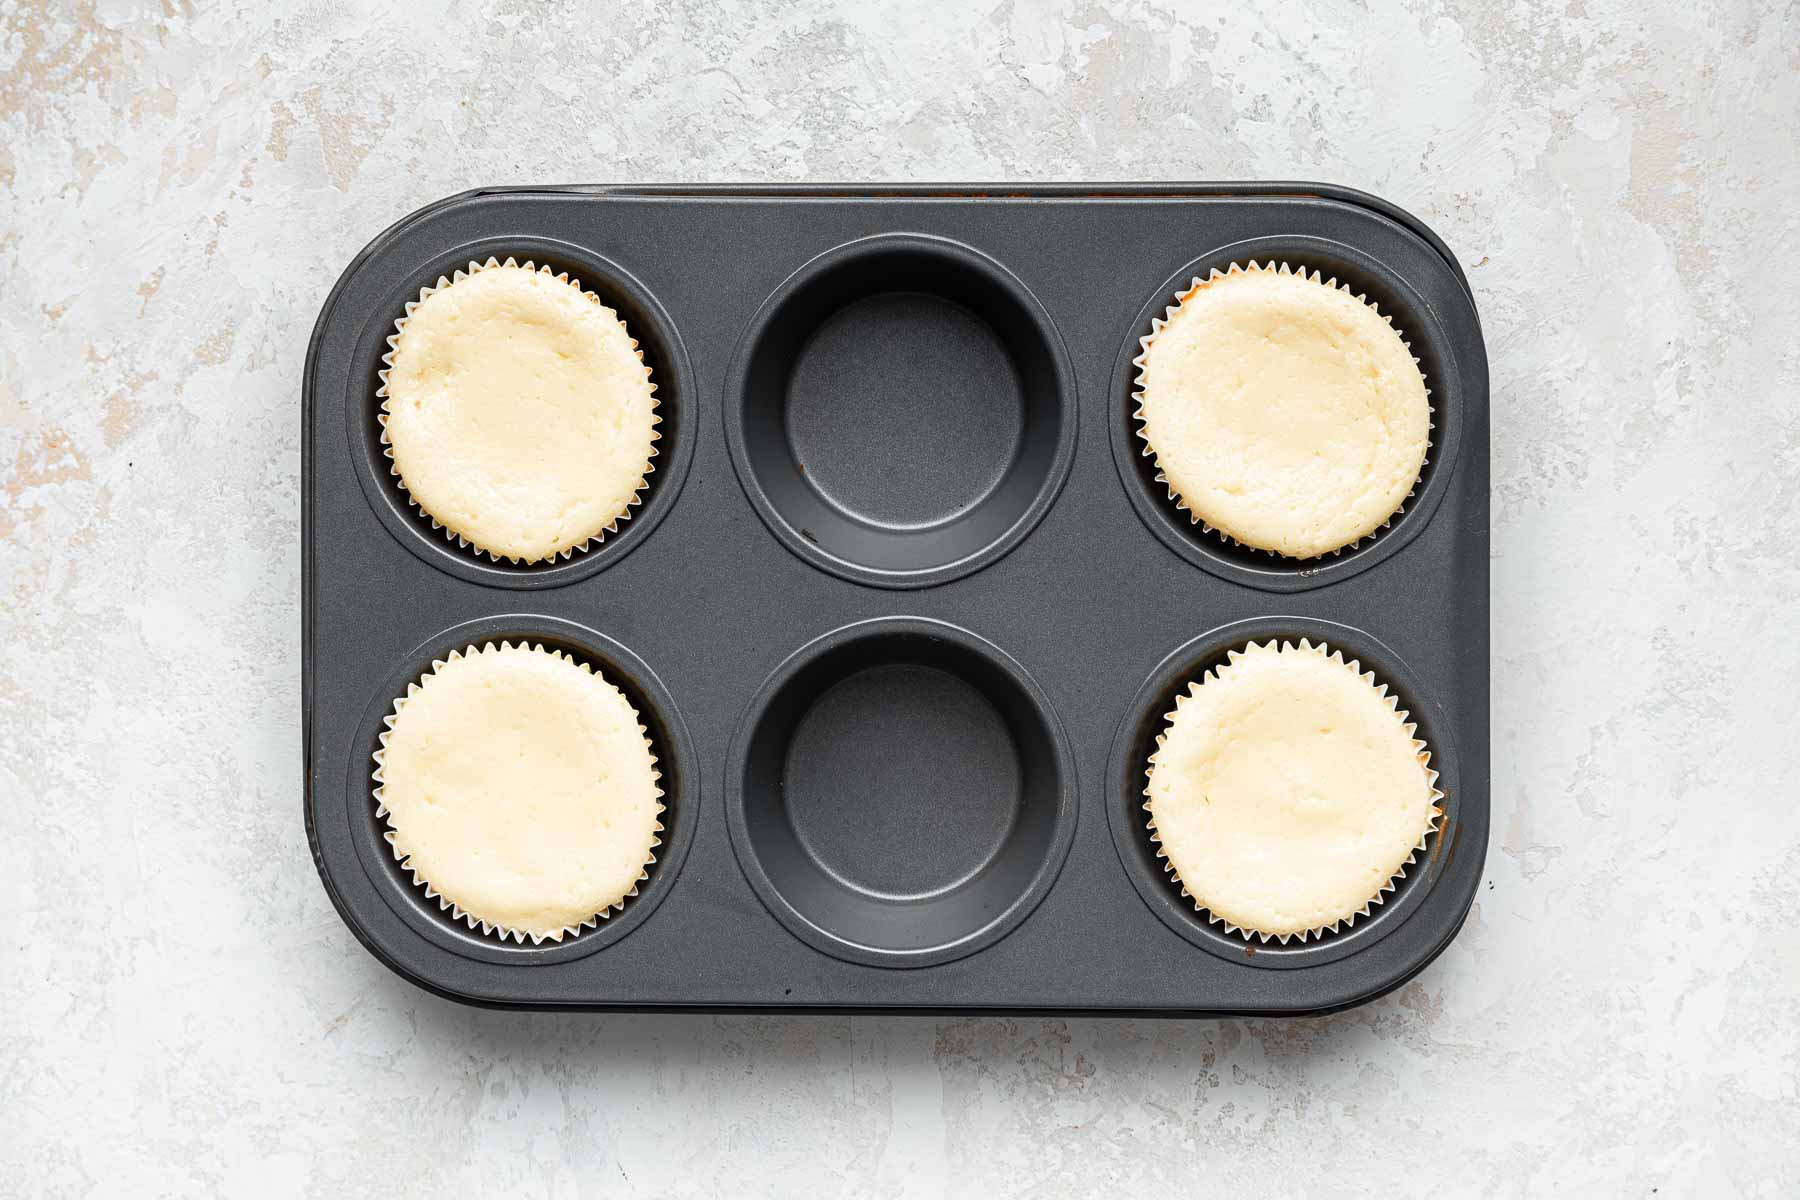 Four white cheesecakes baked in a muffin pan.